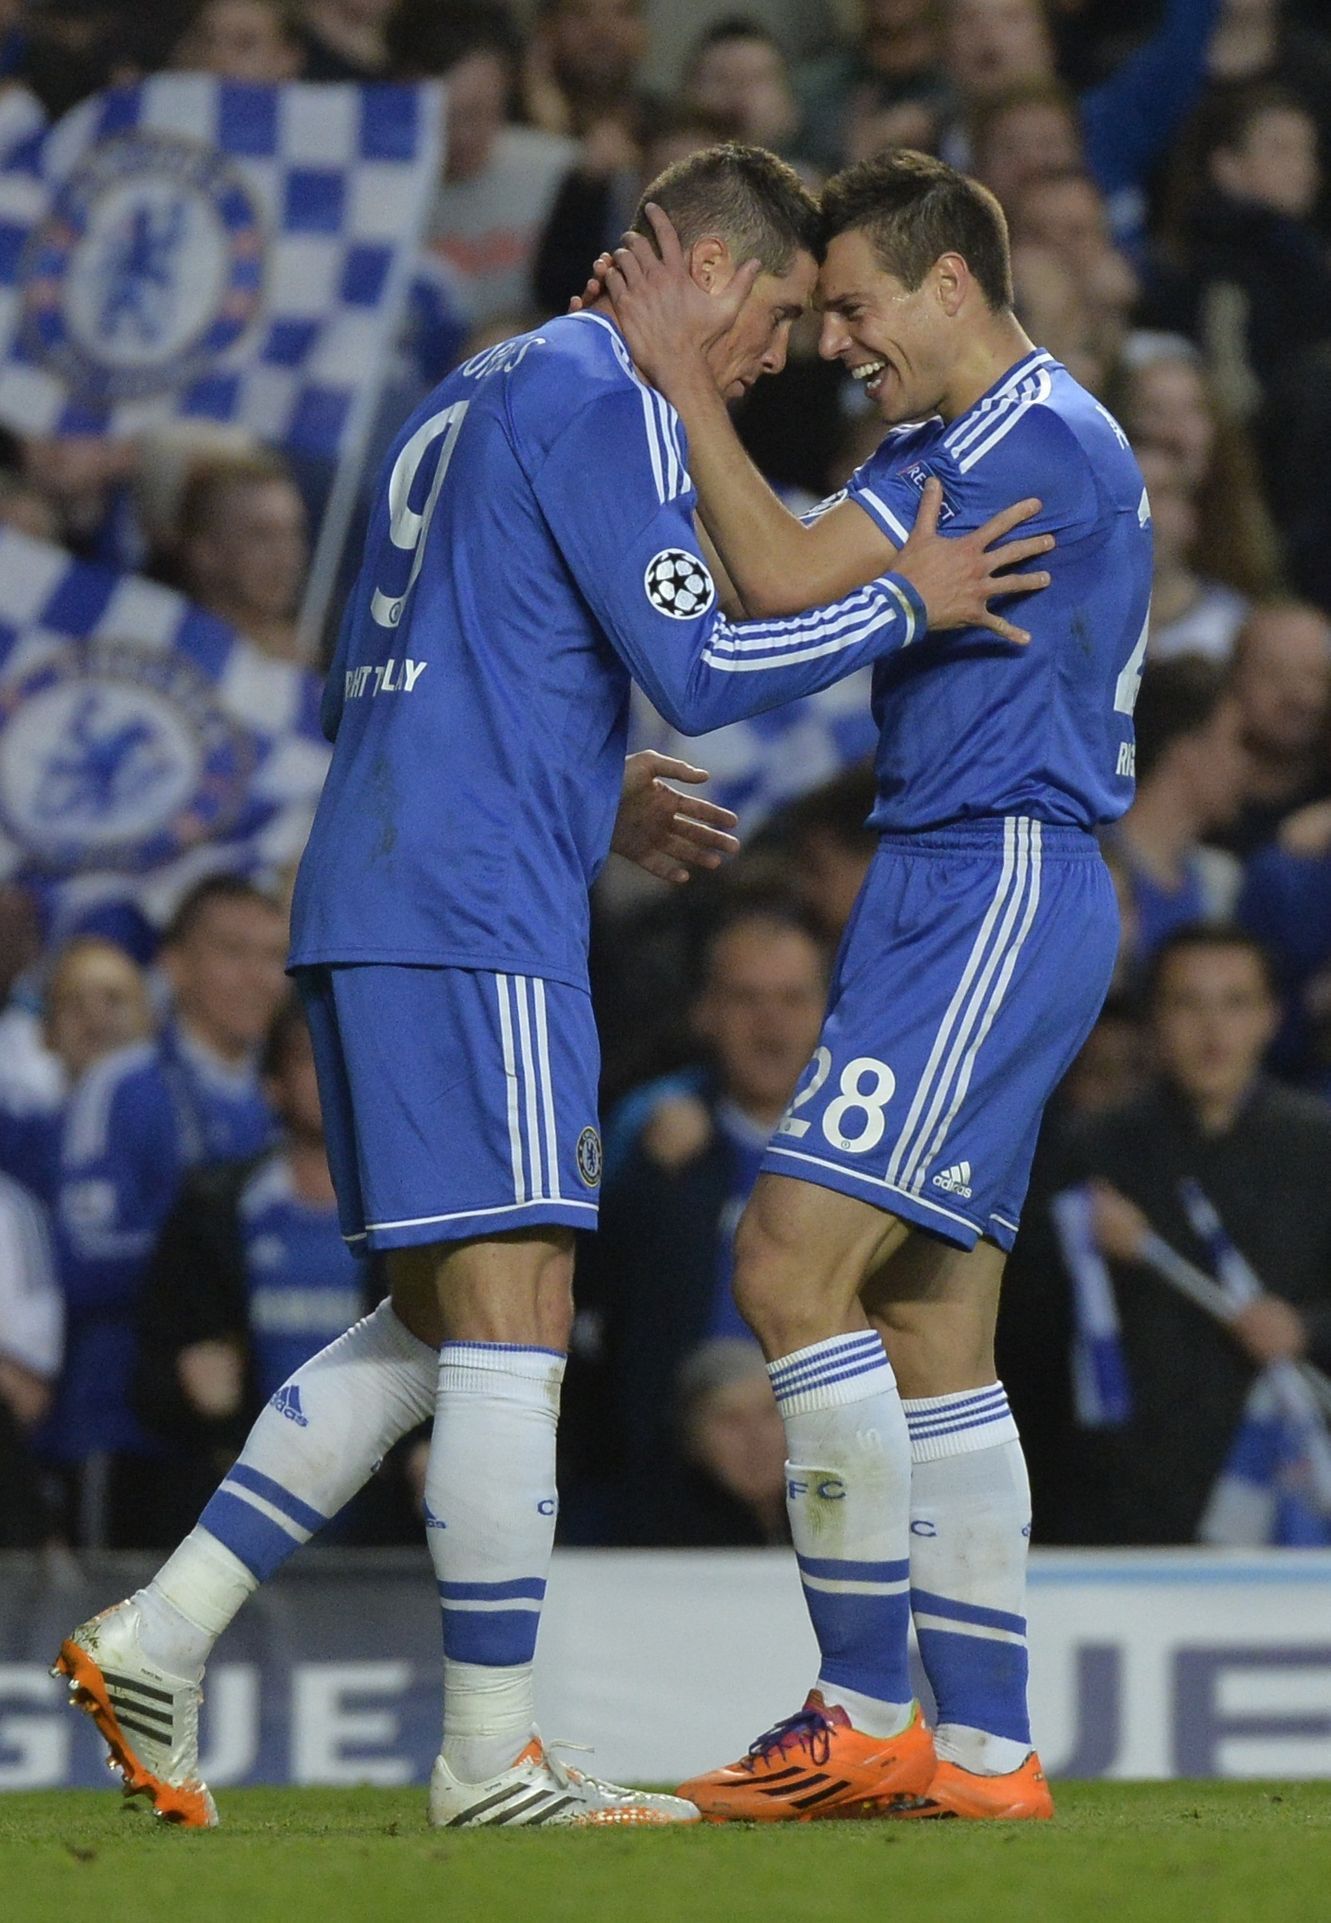 Chelsea's Torres  is congratulated by Azpilicueta after scoring a goal against Atletico Madrid in Champion's League semi-final second leg soccer match in London